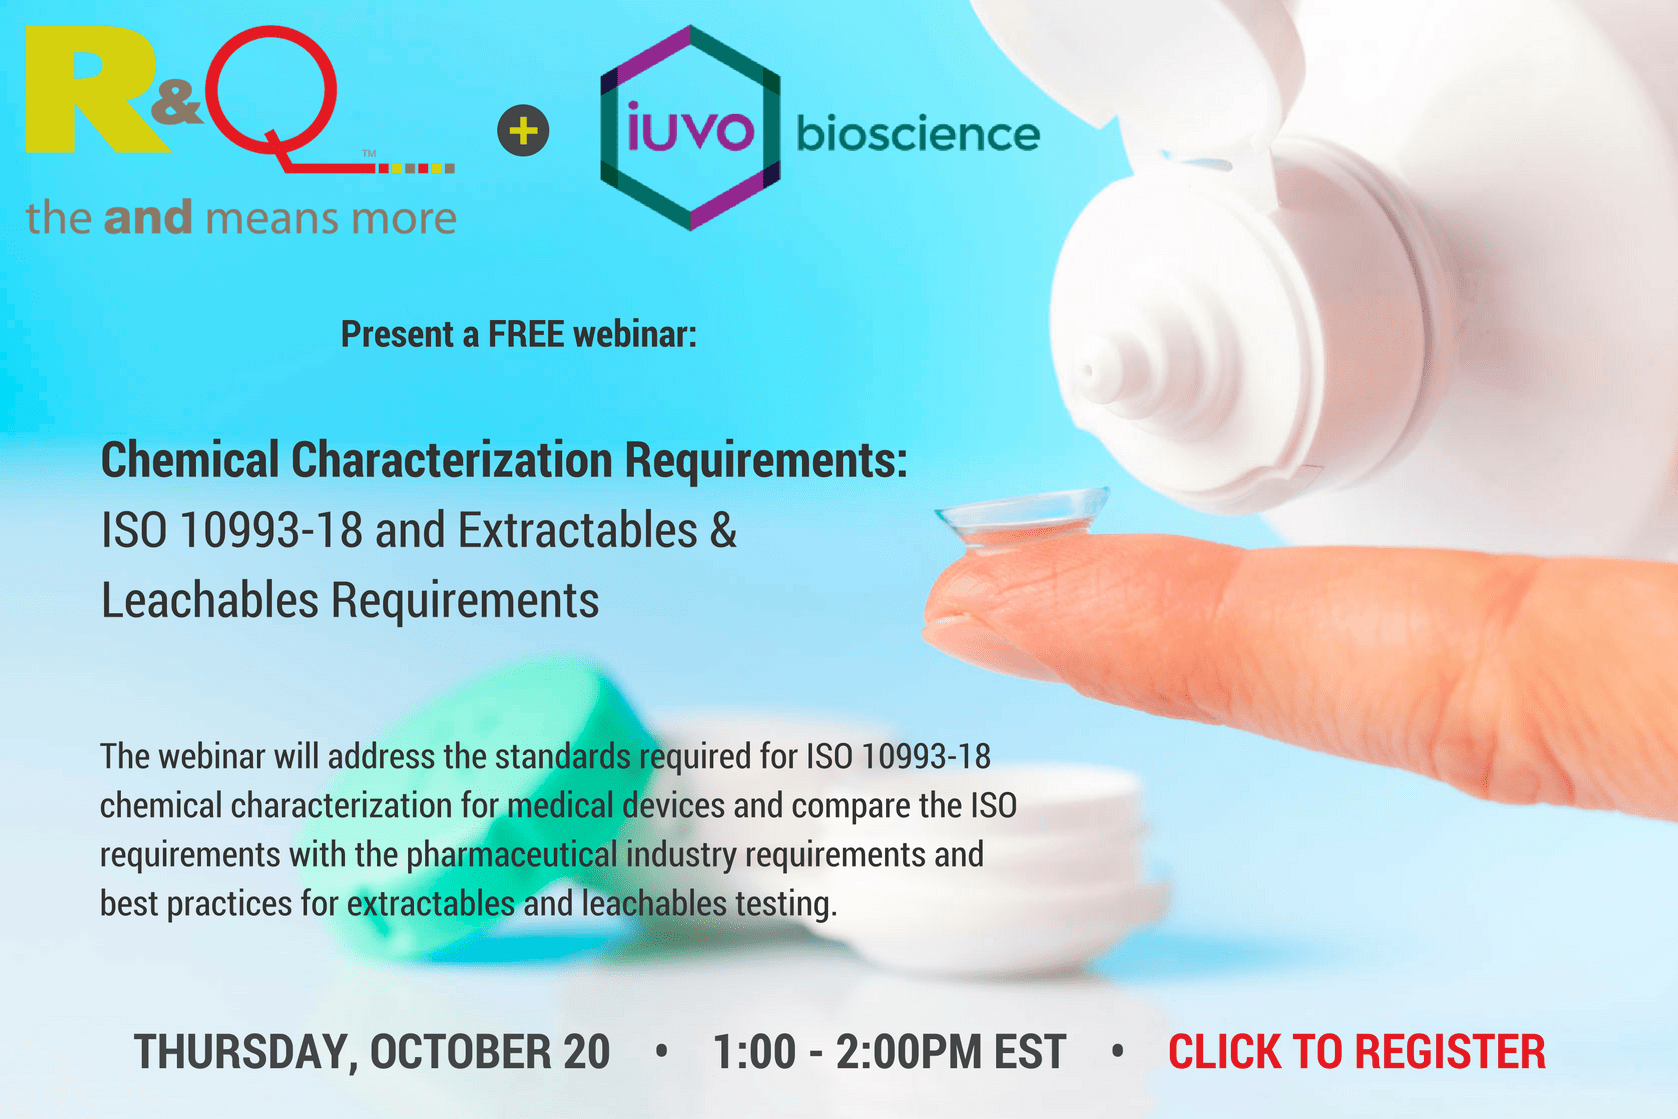 Free Webinar: Chemical Characterization Requirements: ISO 10993-18 and Extractables & Leachables Requirements